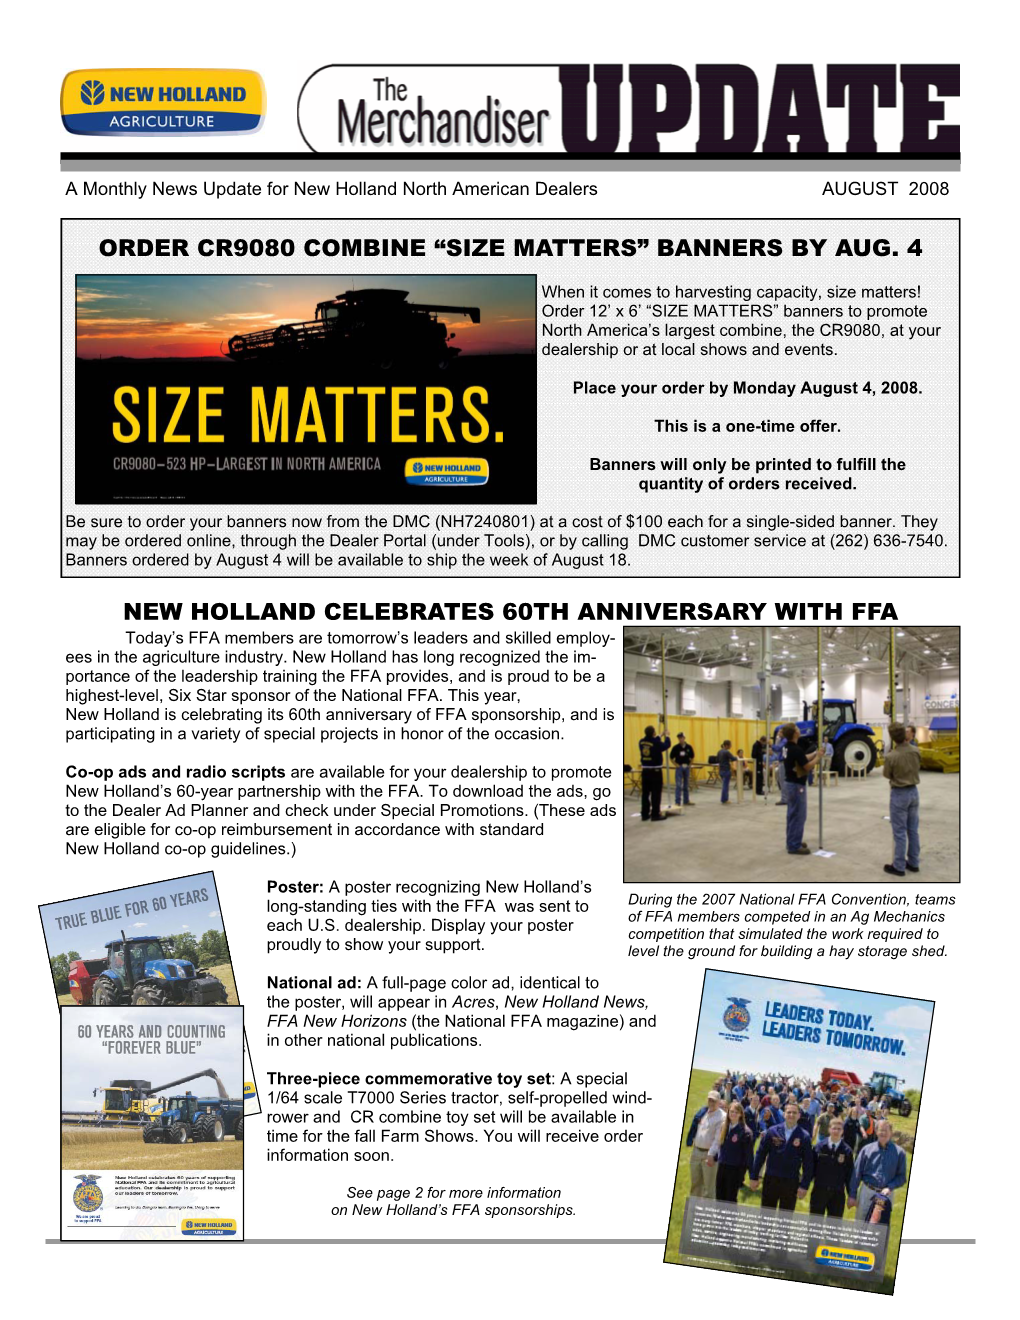 New Holland Celebrates 60Th Anniversary with Ffa Order